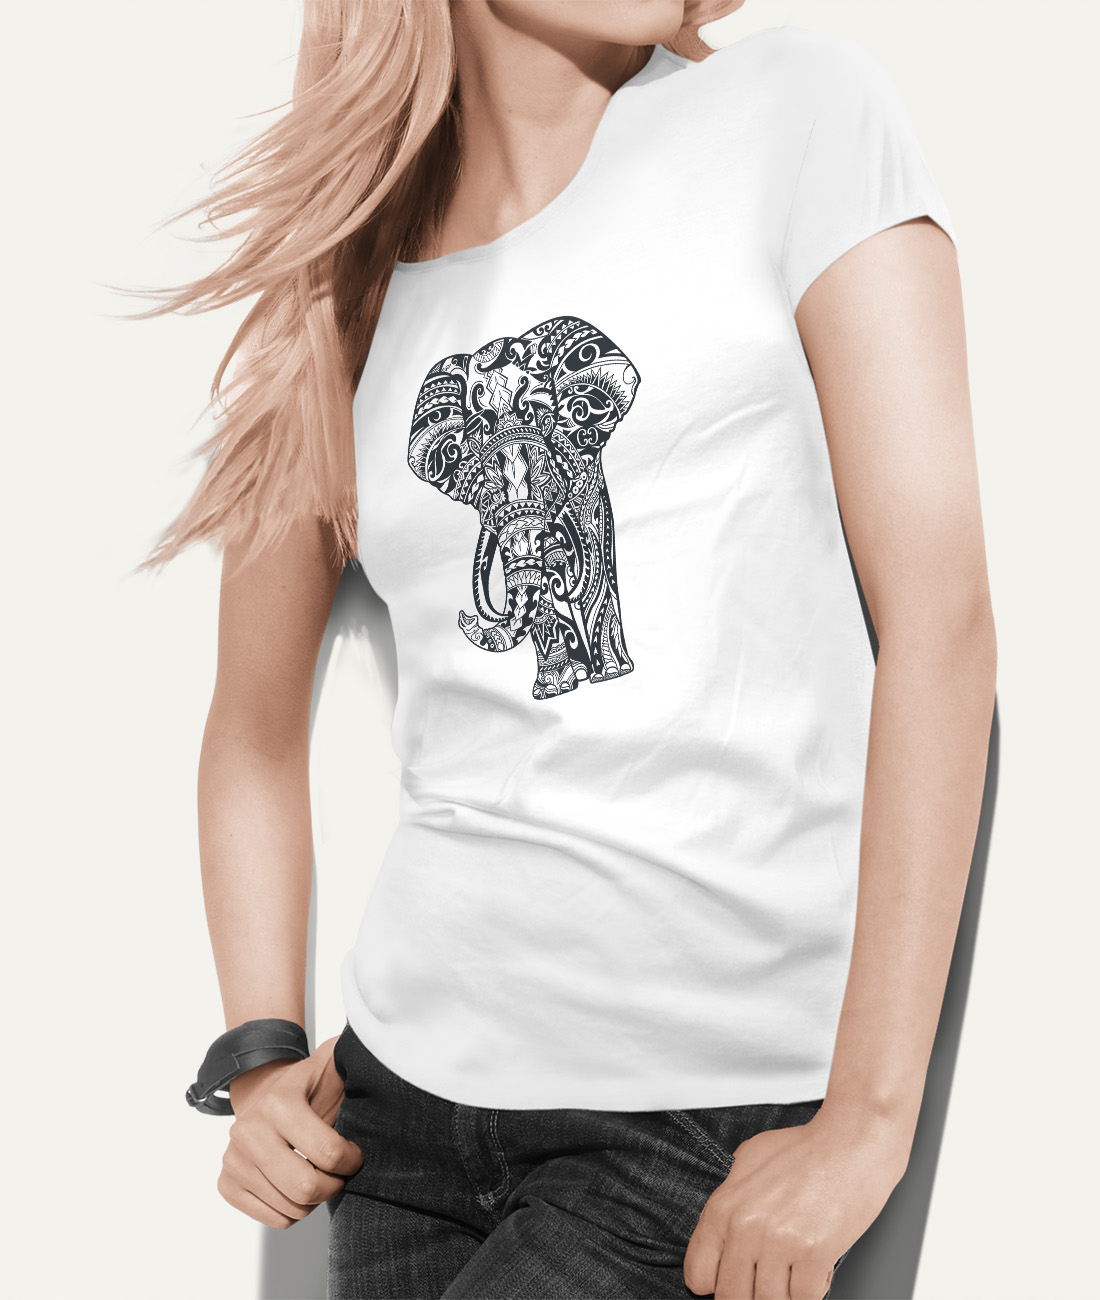 Womens tshirt with an elephant